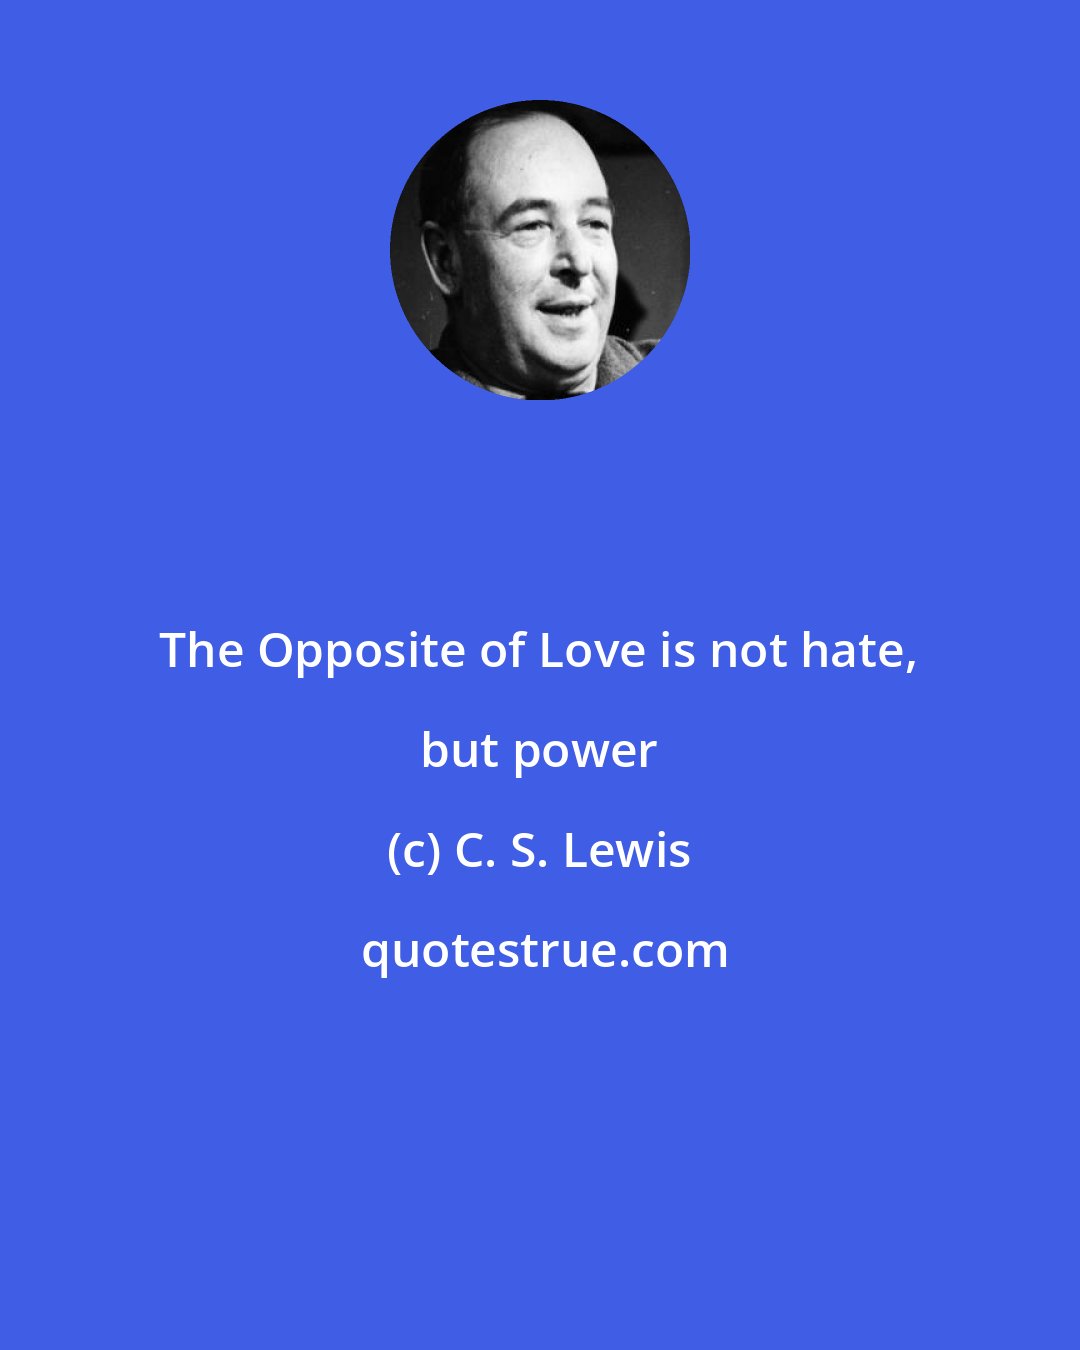 C. S. Lewis: The Opposite of Love is not hate, but power